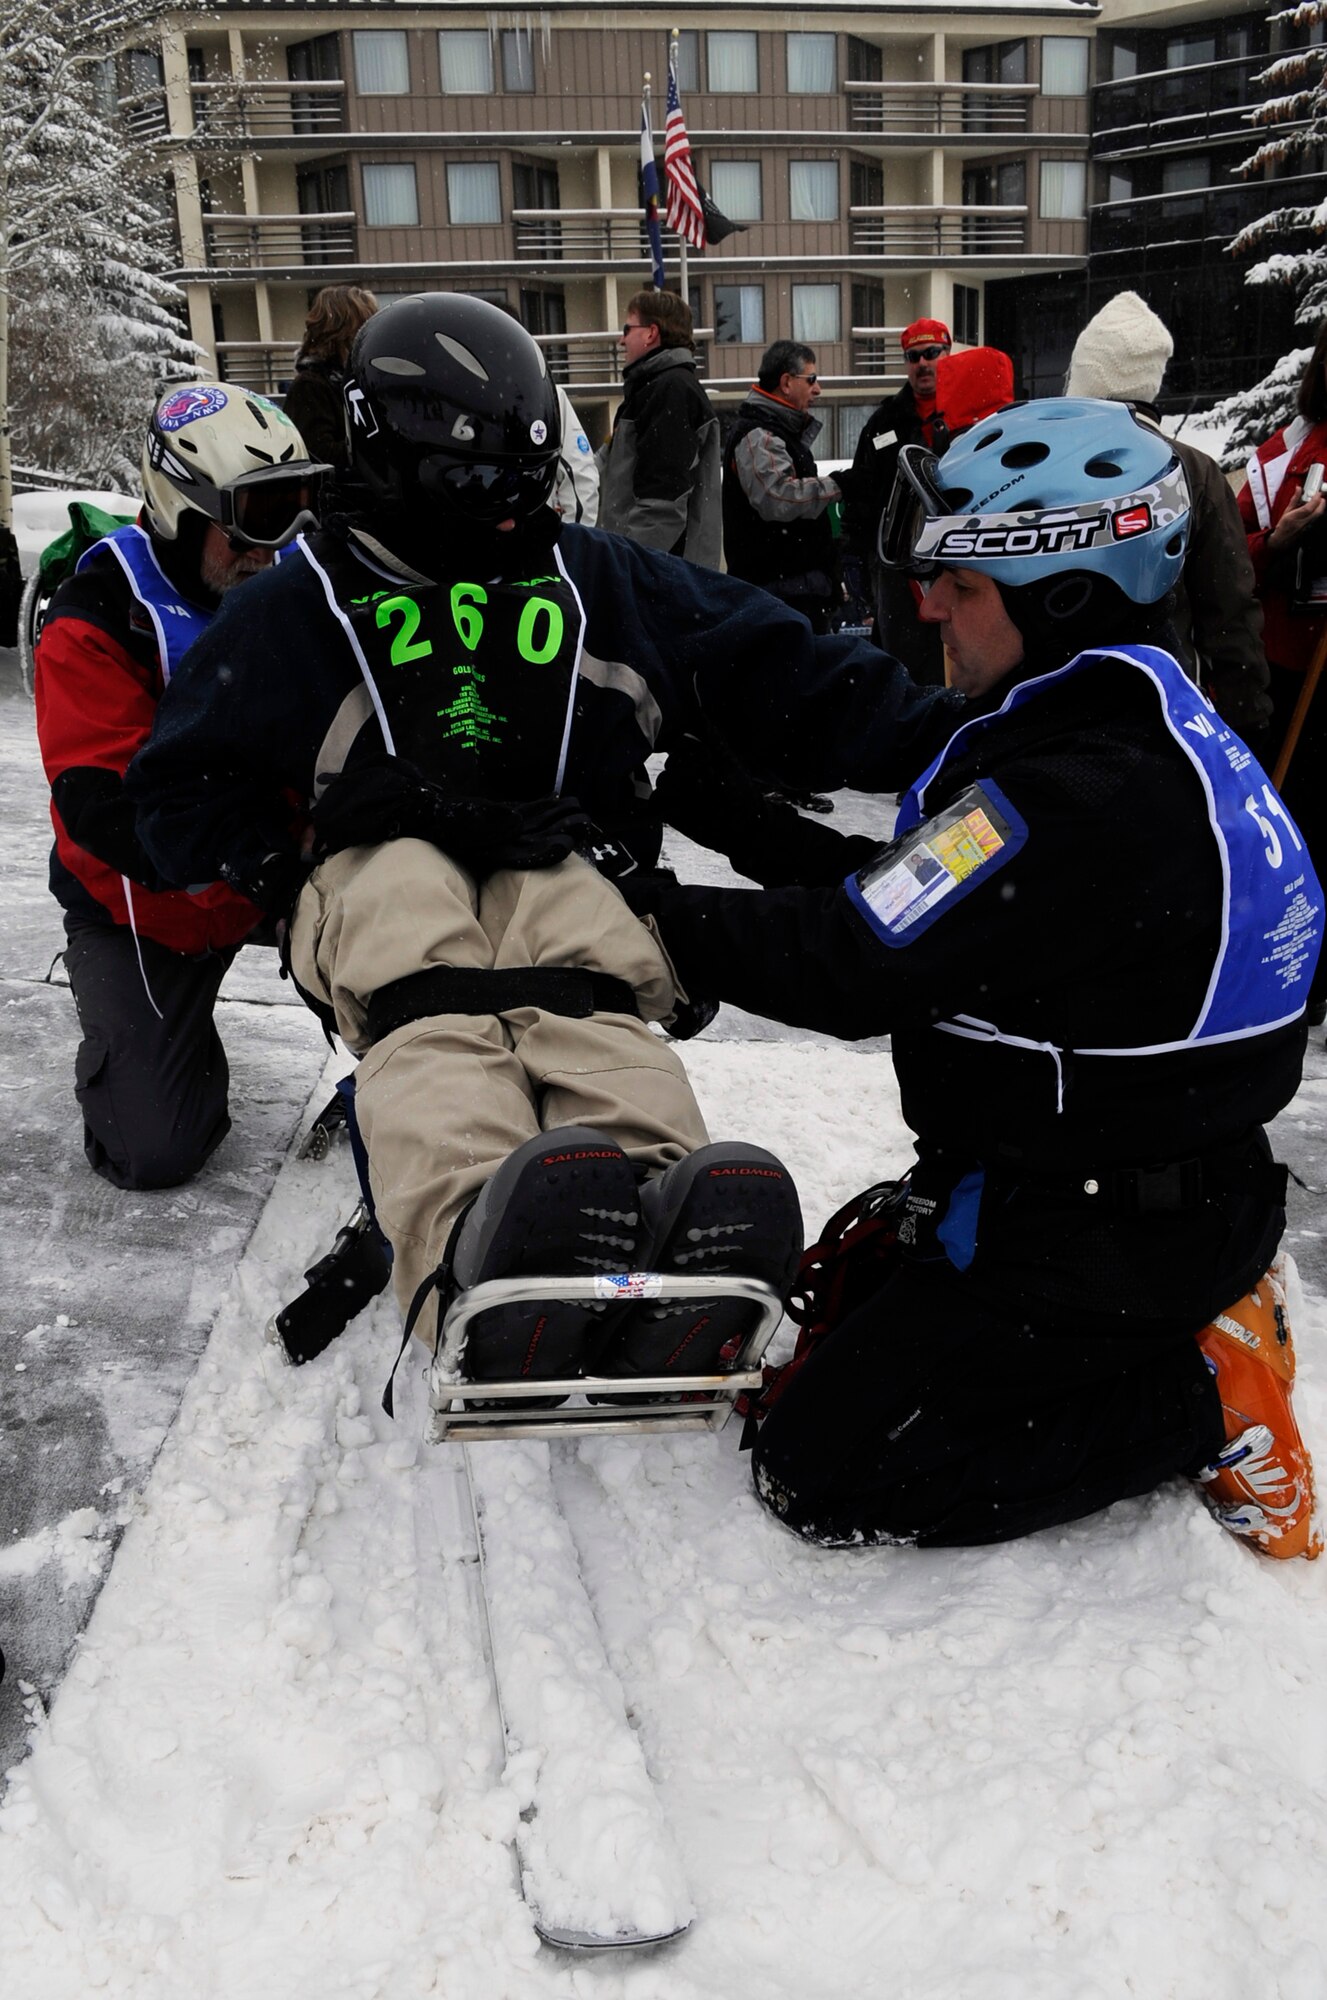 Senior Airman Shawn O'Neil waits his turn to mono-ski with the help of an instructor during the 23rd National Disabled Veterans Winter Sports Clinic held March 30 at the Snowmass Village, Colo. The annual disabled learn-to-ski clinic helps motivate and rehabilitate disabled Department of Defense veterans. (U.S. Air Force photo/Staff Sgt. 
Desiree N. Palacios)

